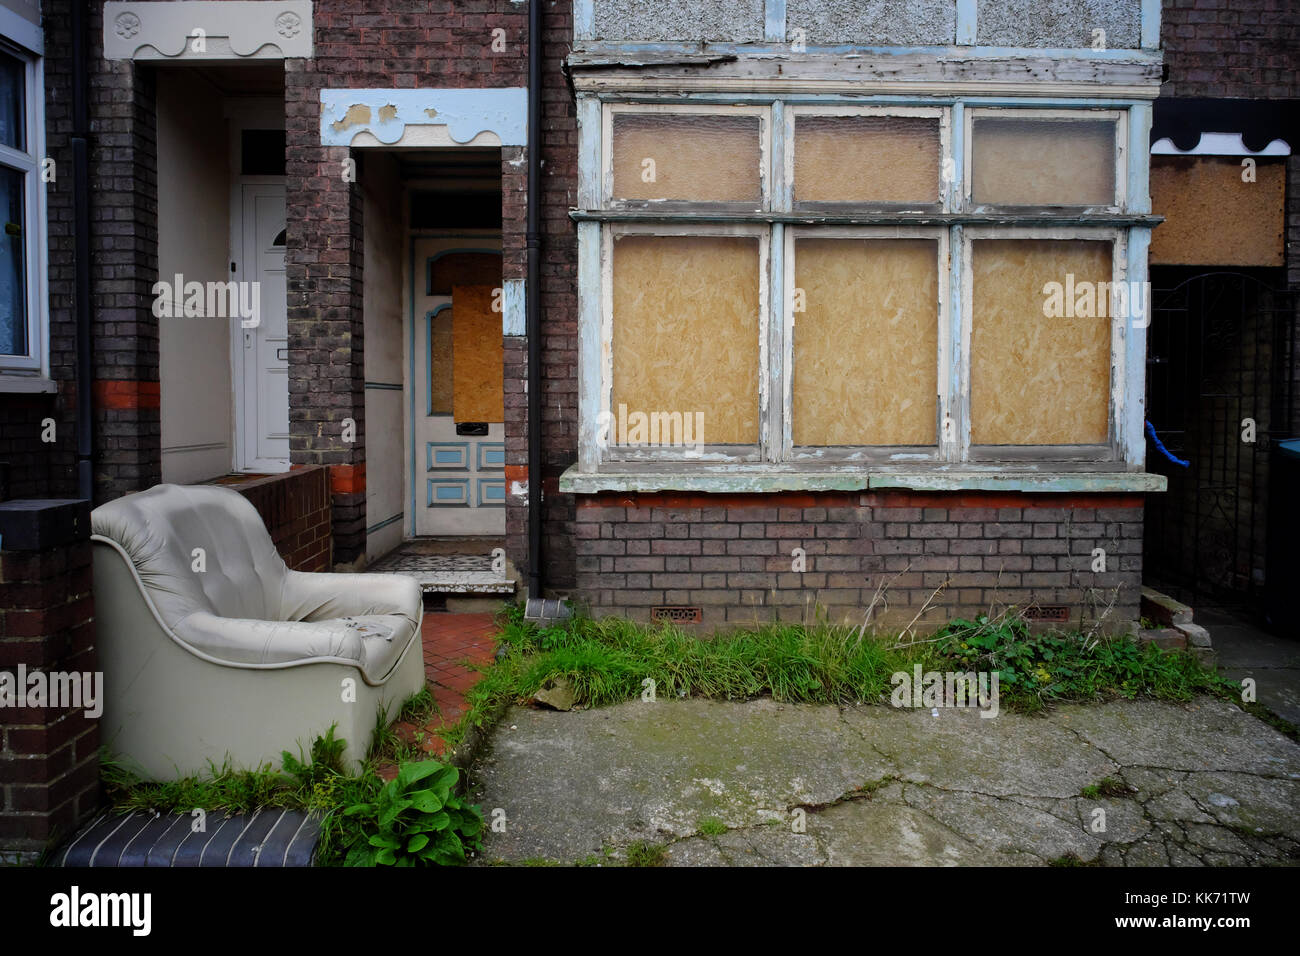 Boarded up house with old sofa left outside in Luton, Bedfordshire, England Stock Photo